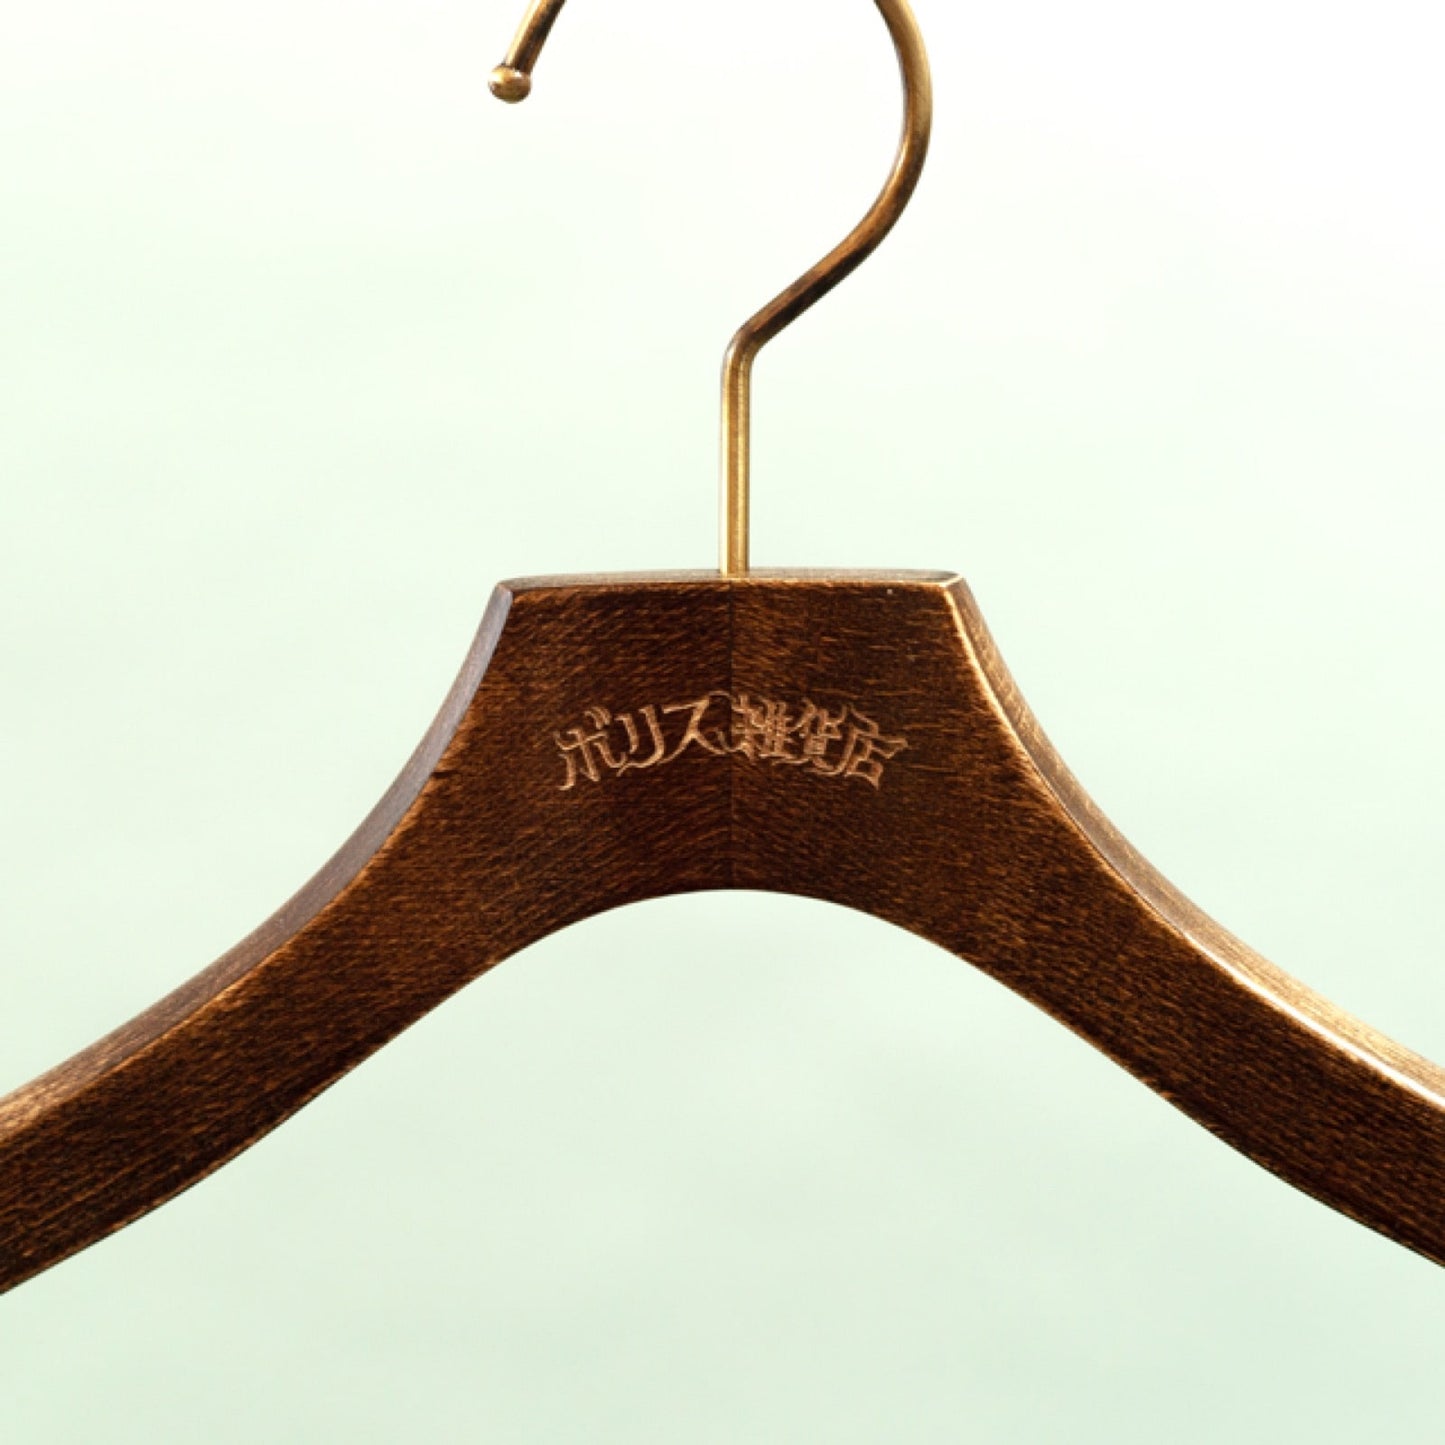 Original hanger with logo (with cover: Ookina Kino Uede)